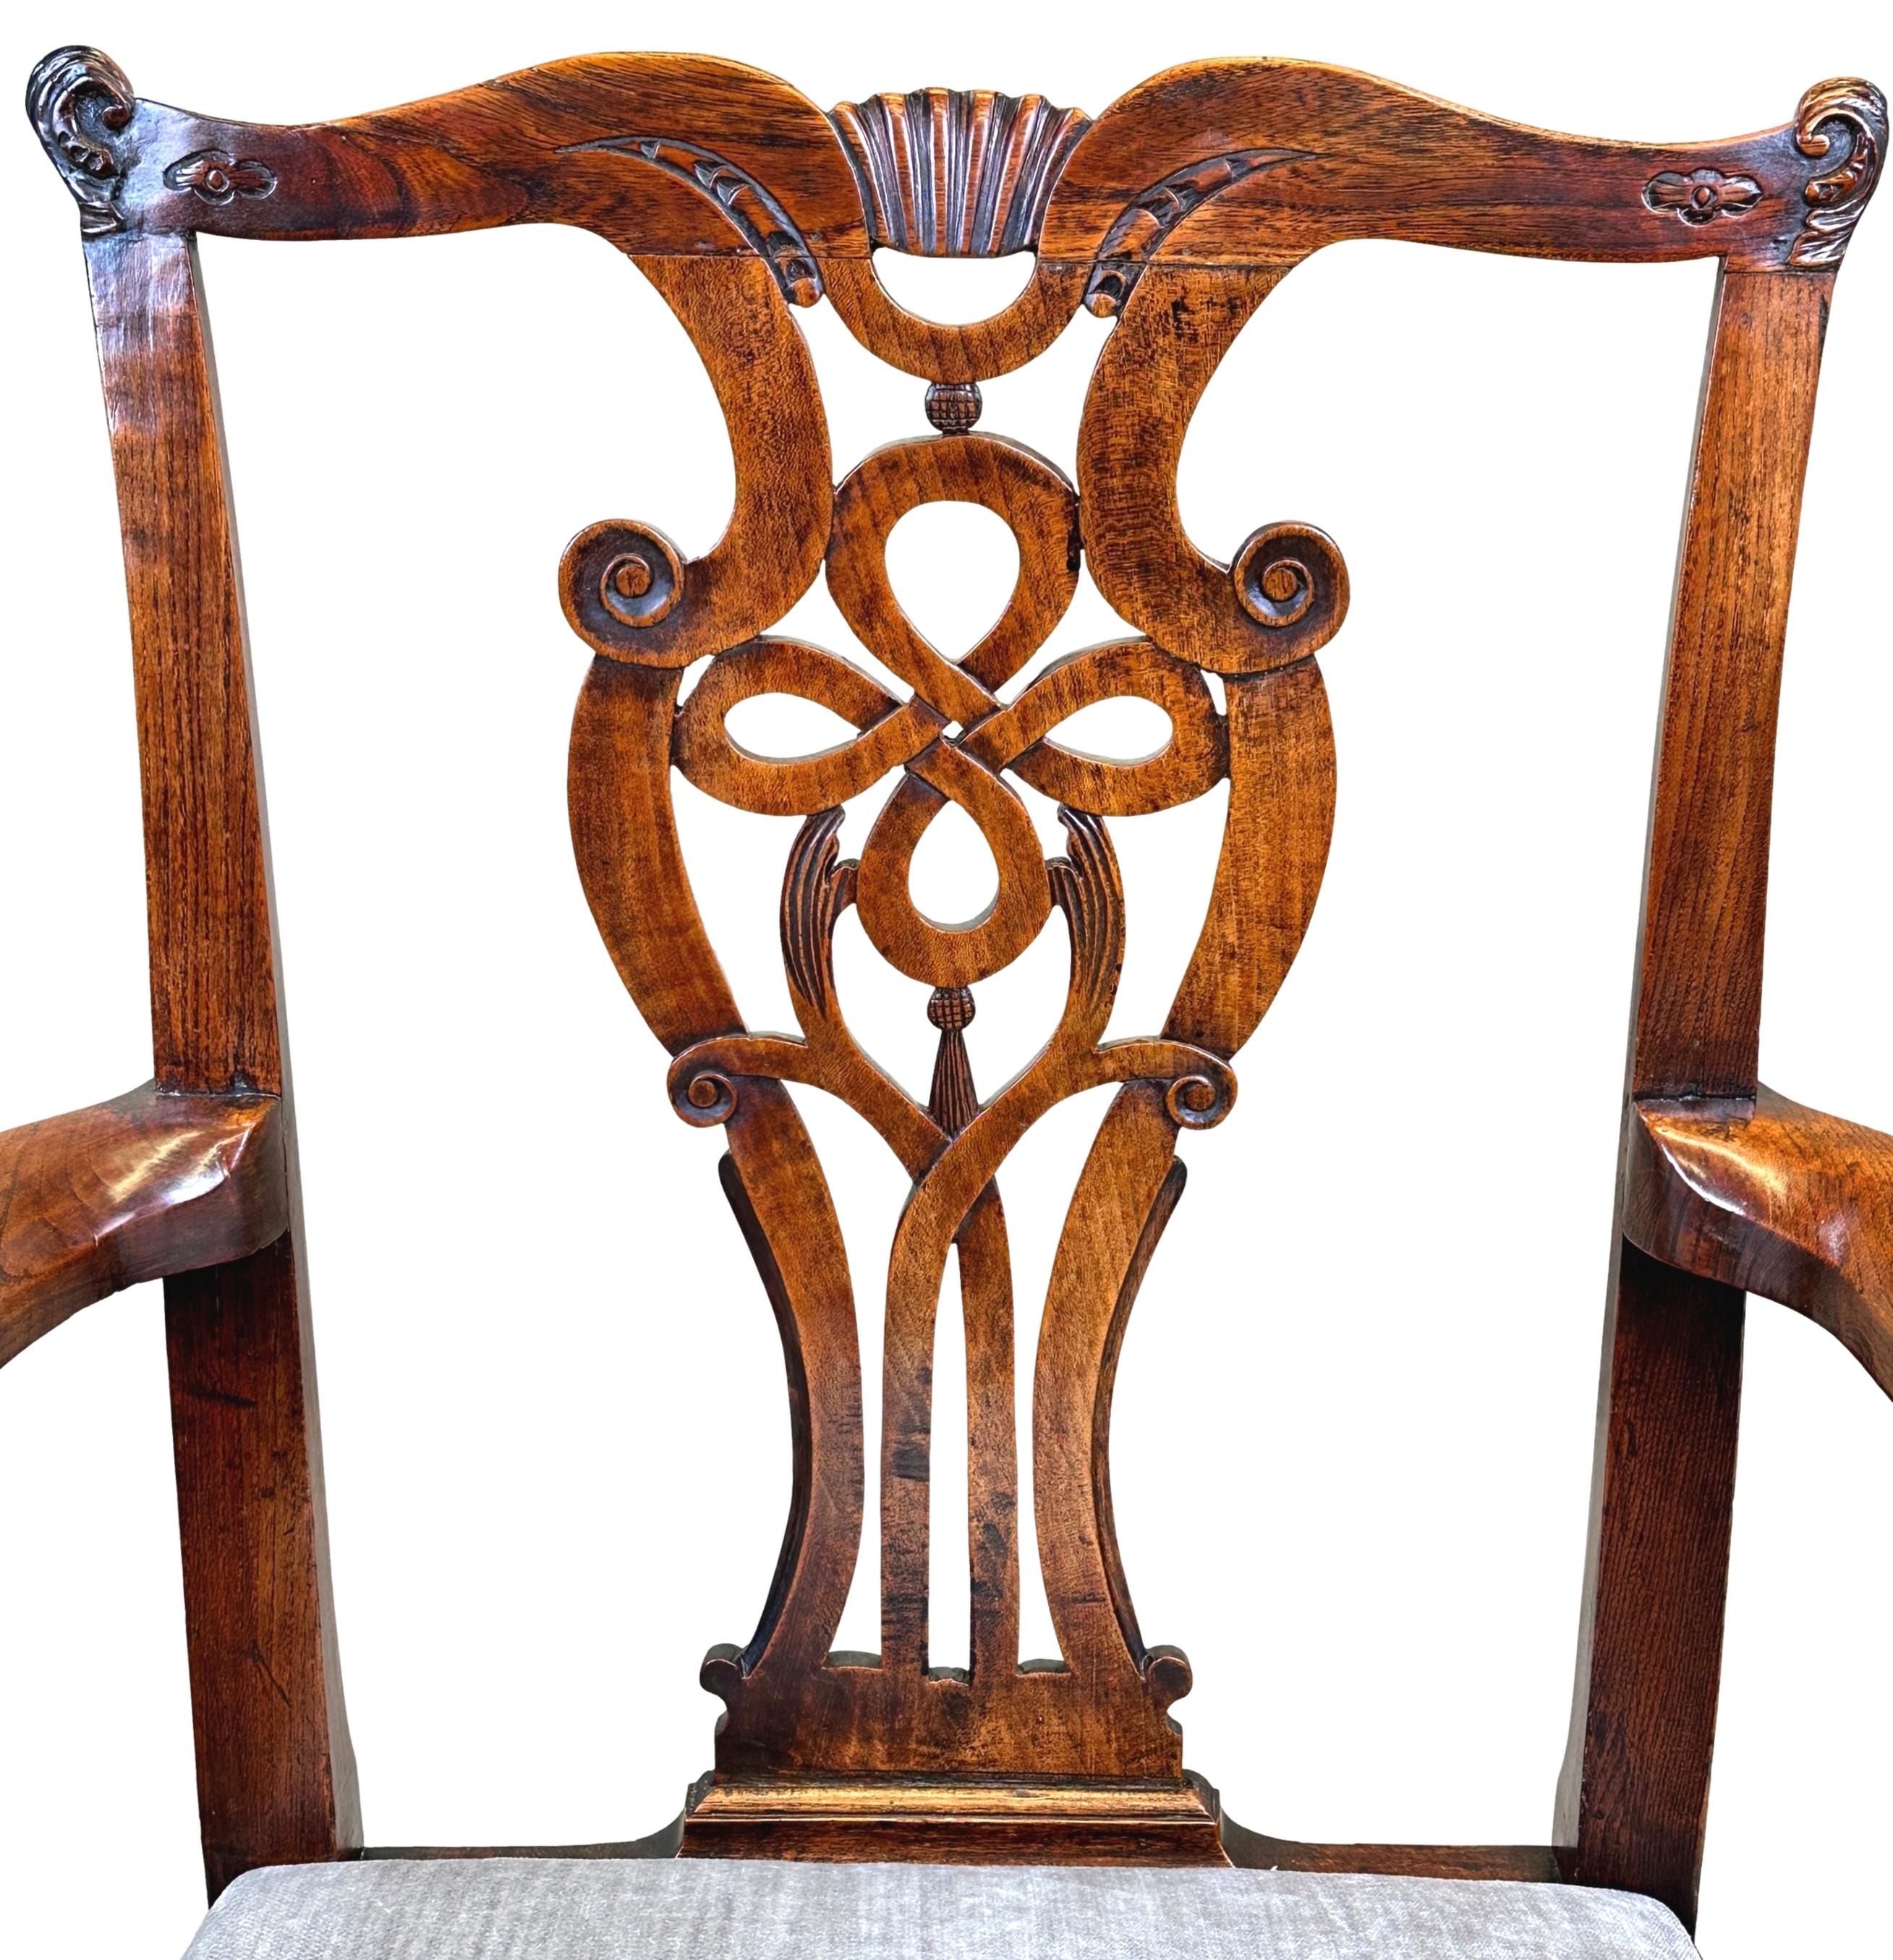 A very attractive George II Period, 18th century Elm carver armchair, Retaining Exceptional Colour & Patina Throughout, Having Elegant Ribbon Carved Pierced Splat Back And Scrolling Arms, Over Drop In Seat Raised On Square Legs And